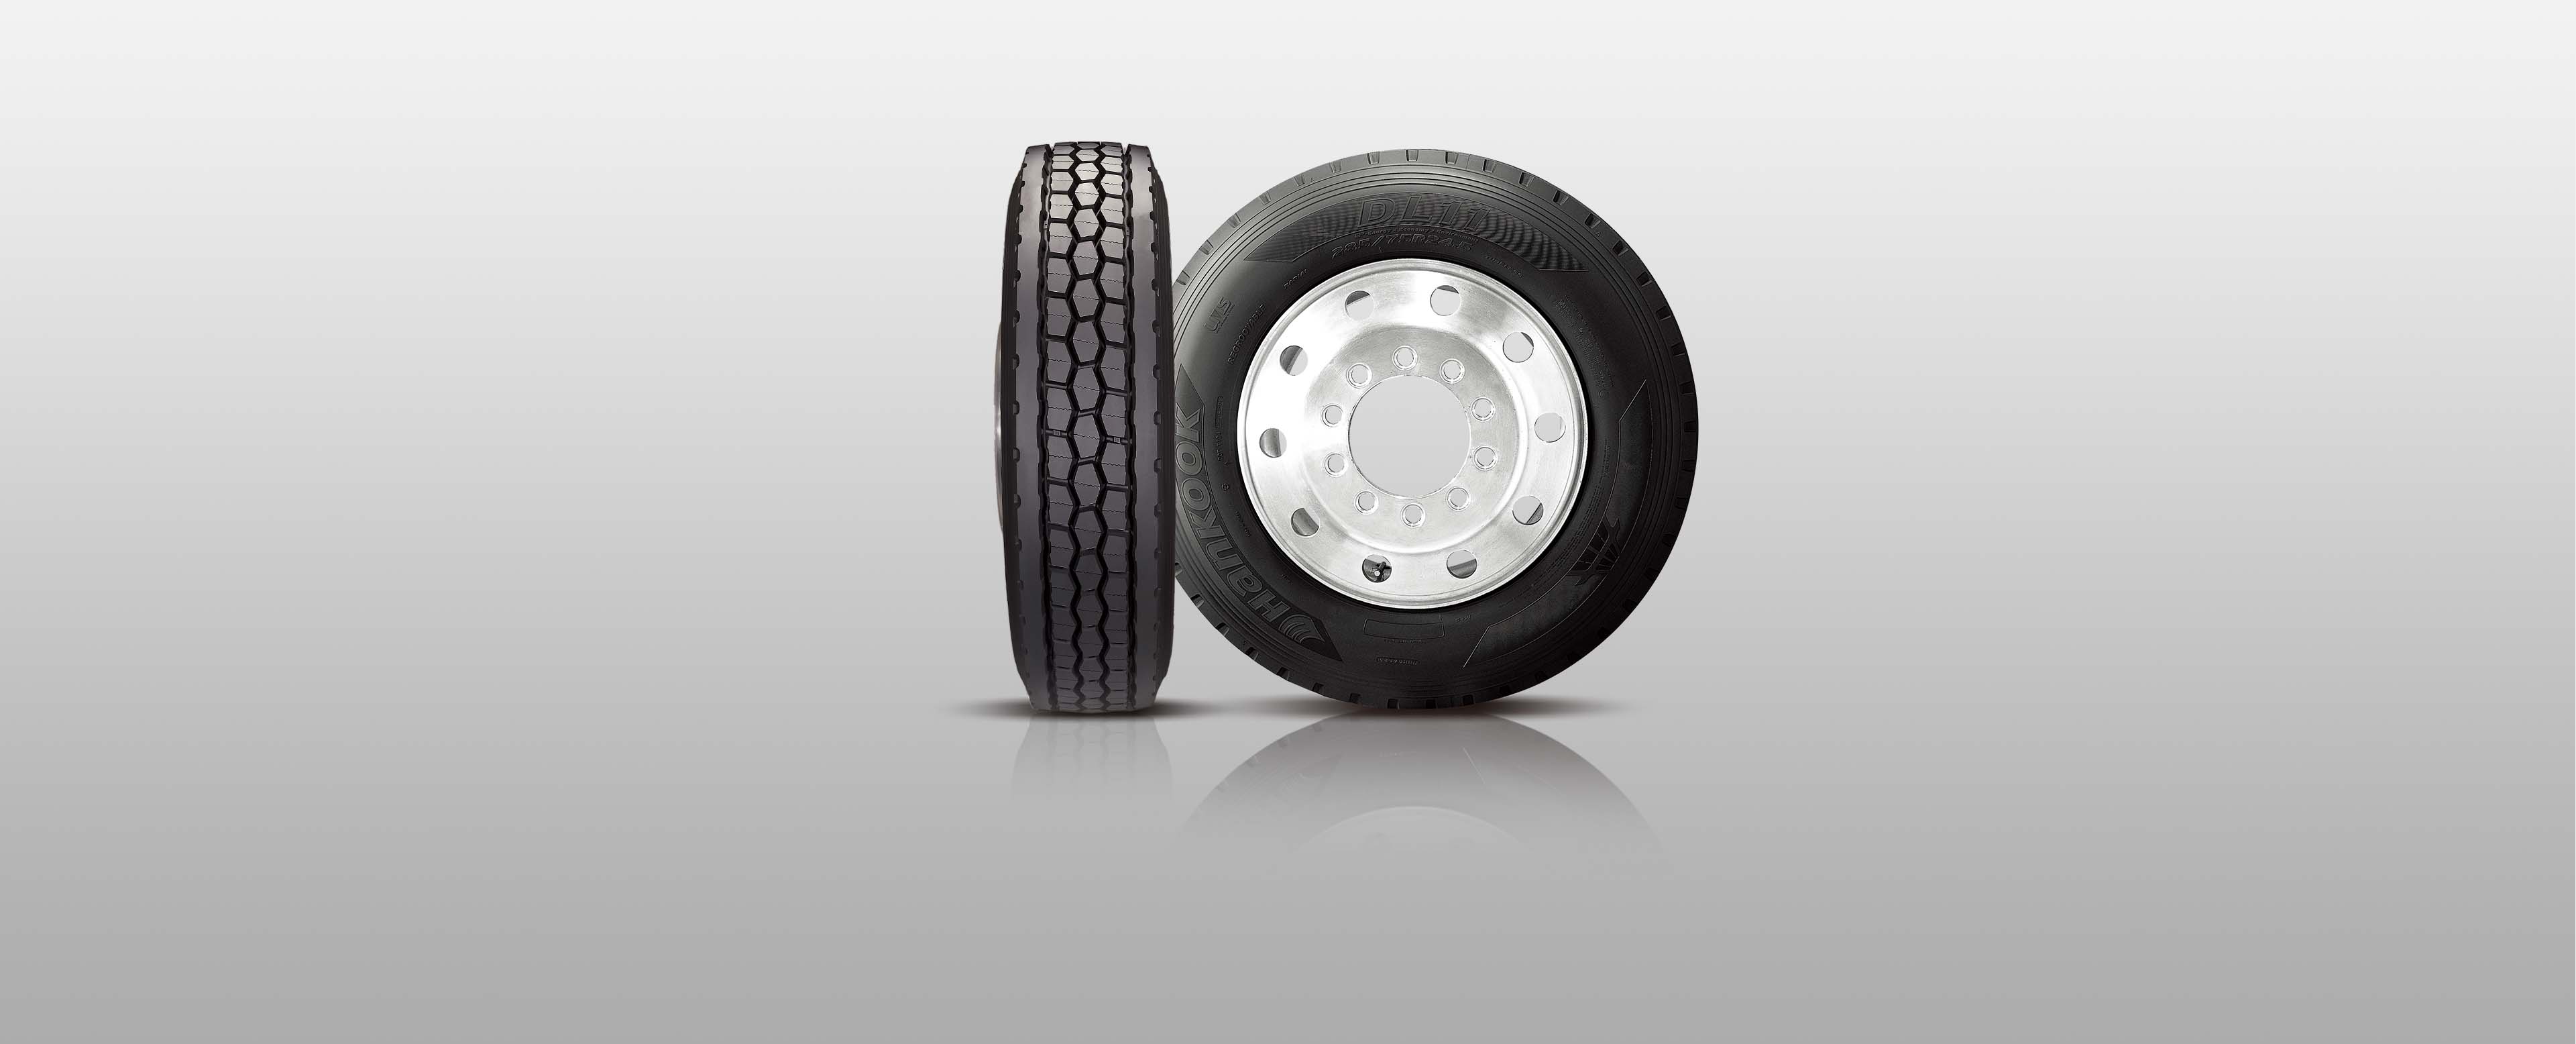 Hankook Tire & Technology-Tires-Smart--DL11-Long haul drive tire with high fuel efficiency and superb traction